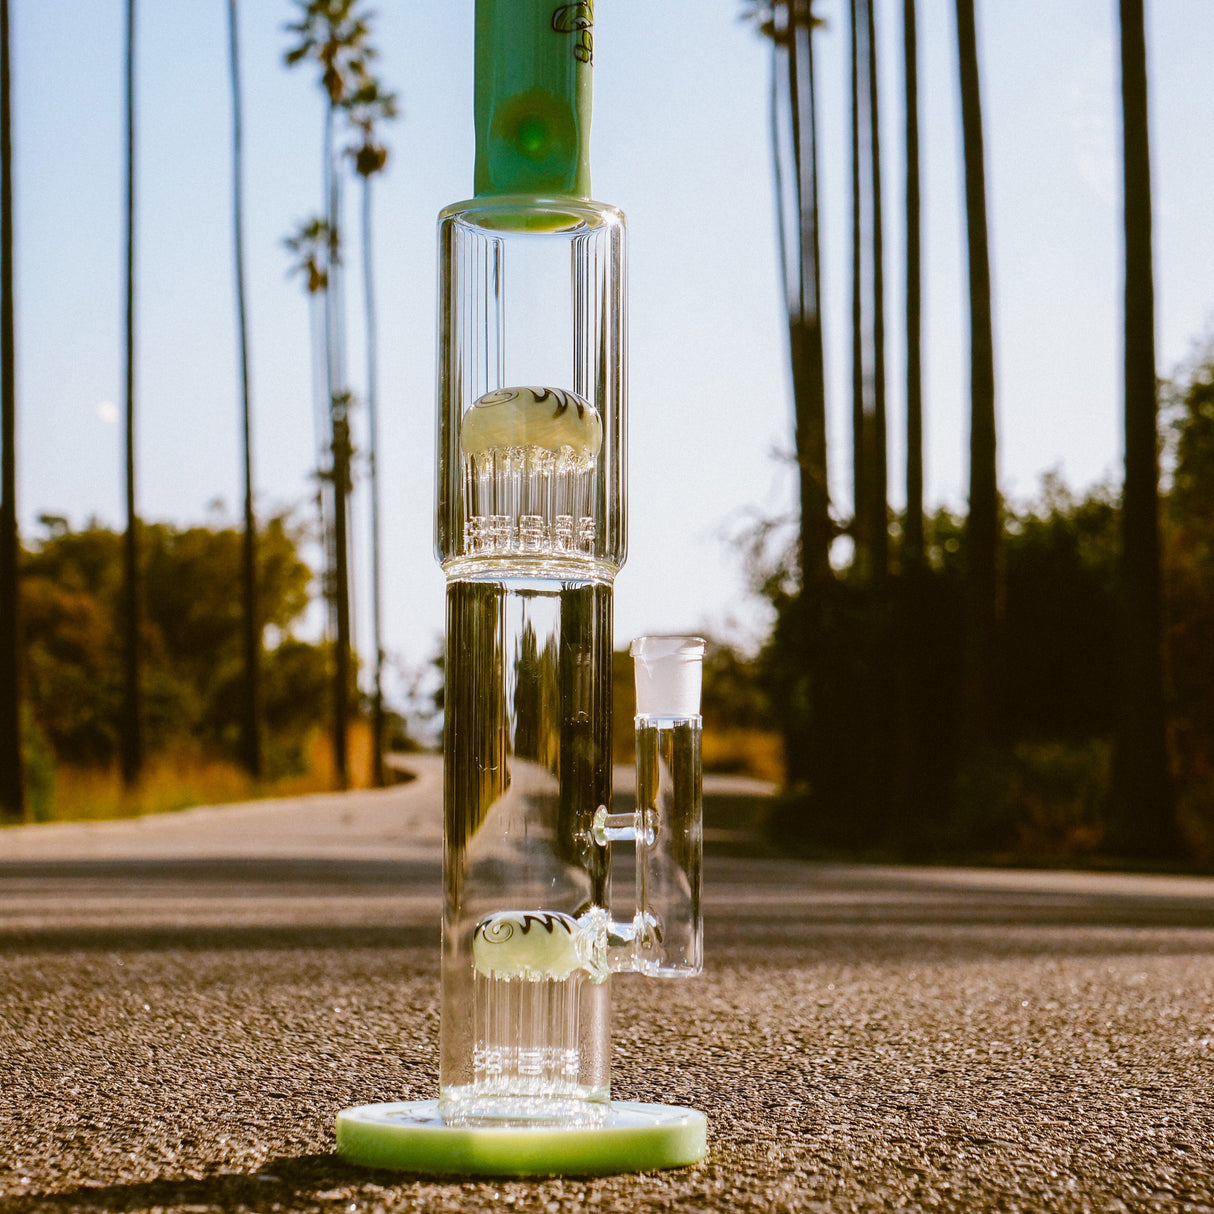 AFM The Double Hitter Reversal 19" borosilicate glass bong for dry herbs, outdoor front view